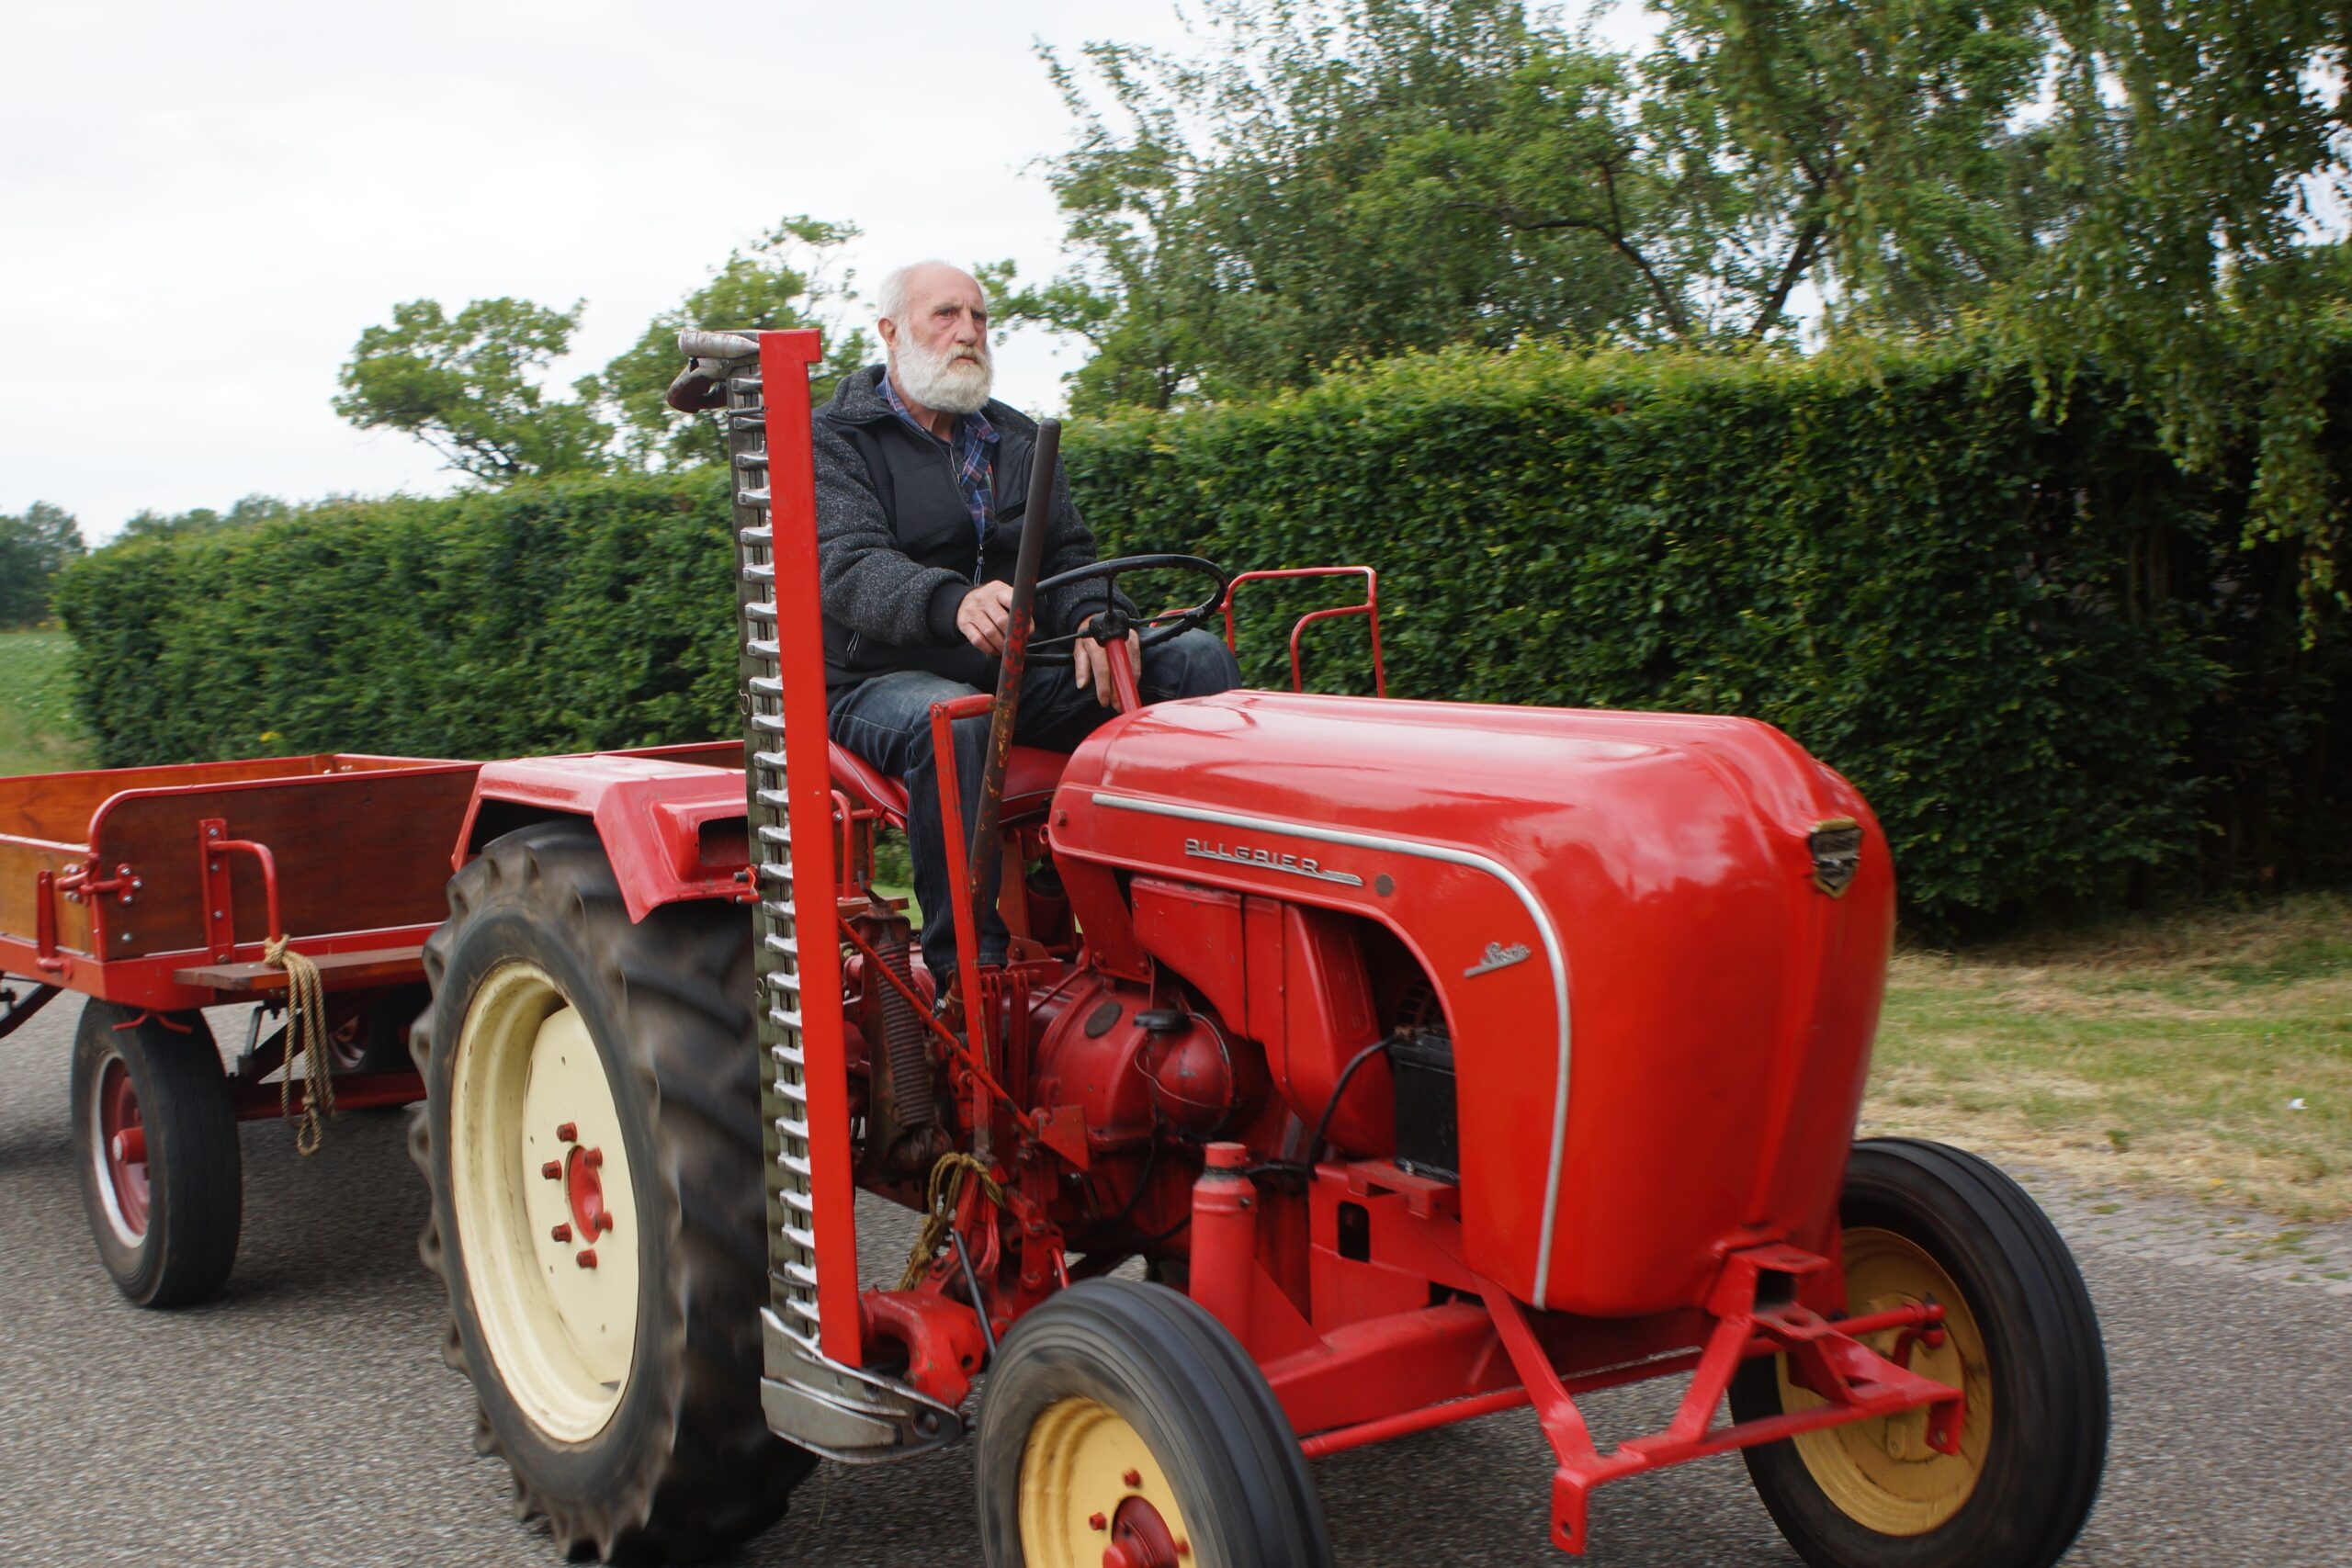 Man riding red tractor